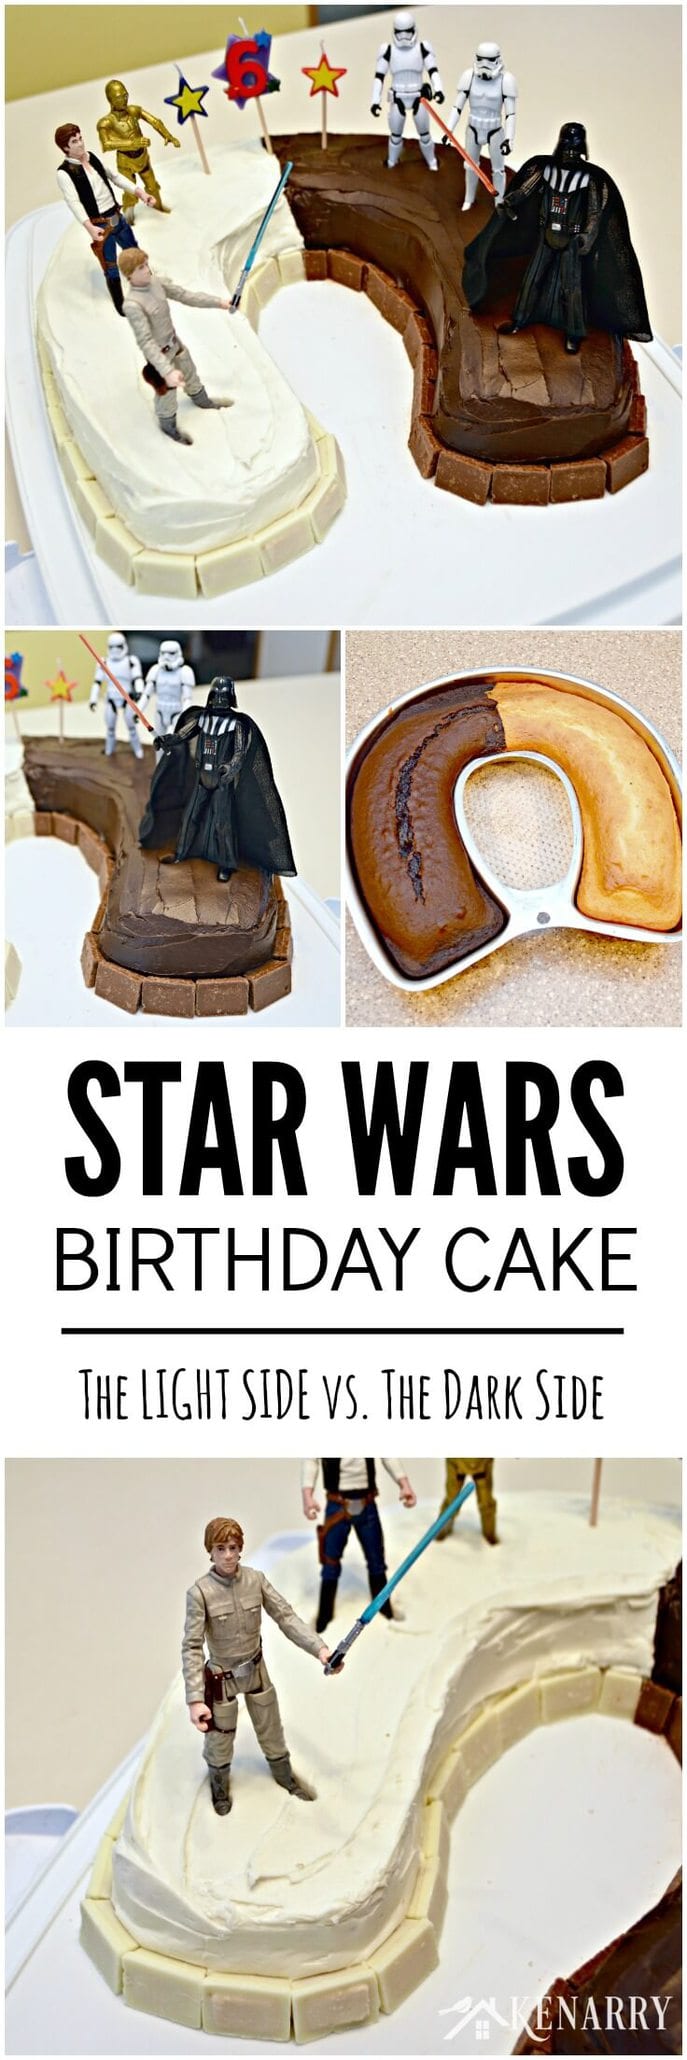 Love this idea for a Star Wars birthday cake! Half the cake is dark chocolate and half the cake is light and showcases my child's favorite characters, Luke Skywalker, Han Solo, C3PO and Darth Vader.